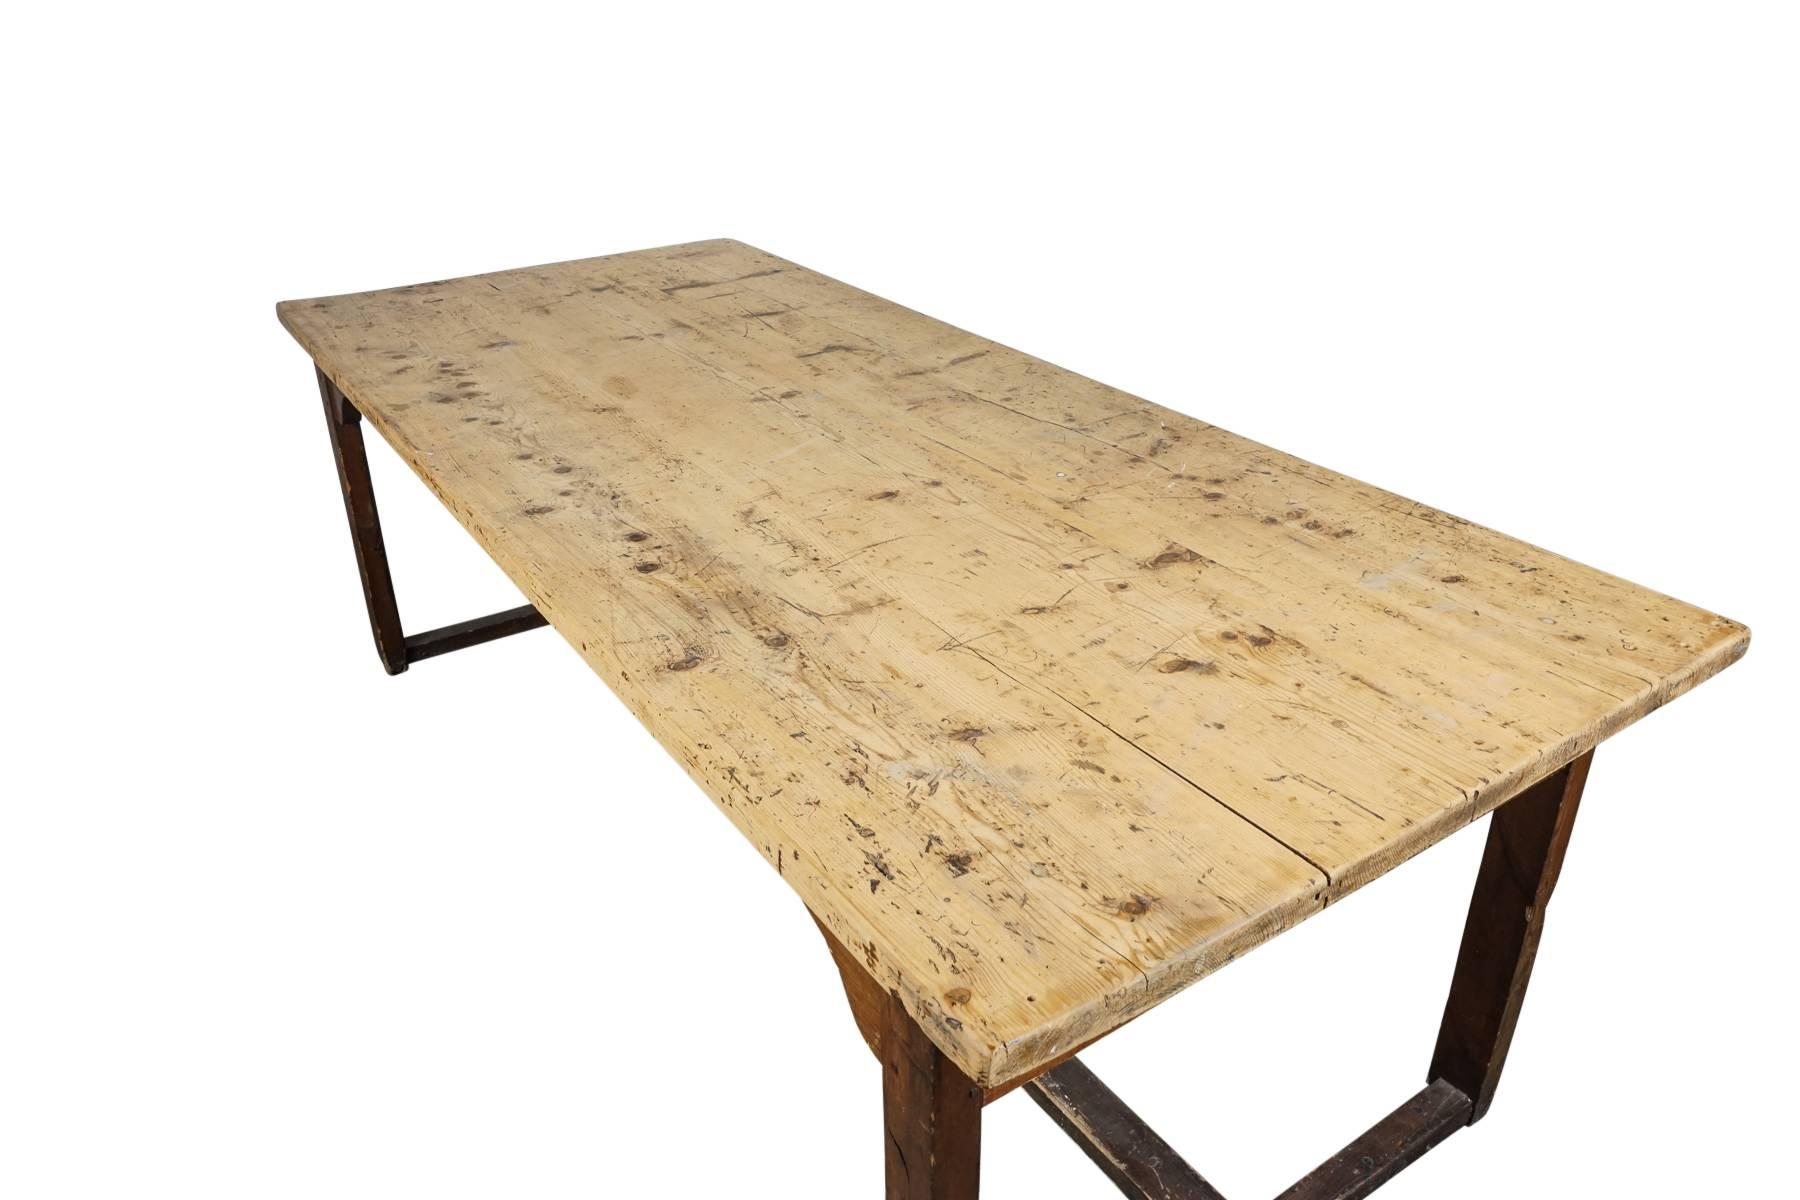 Pine farm table from France with nice wear and patina. Stretcher base.